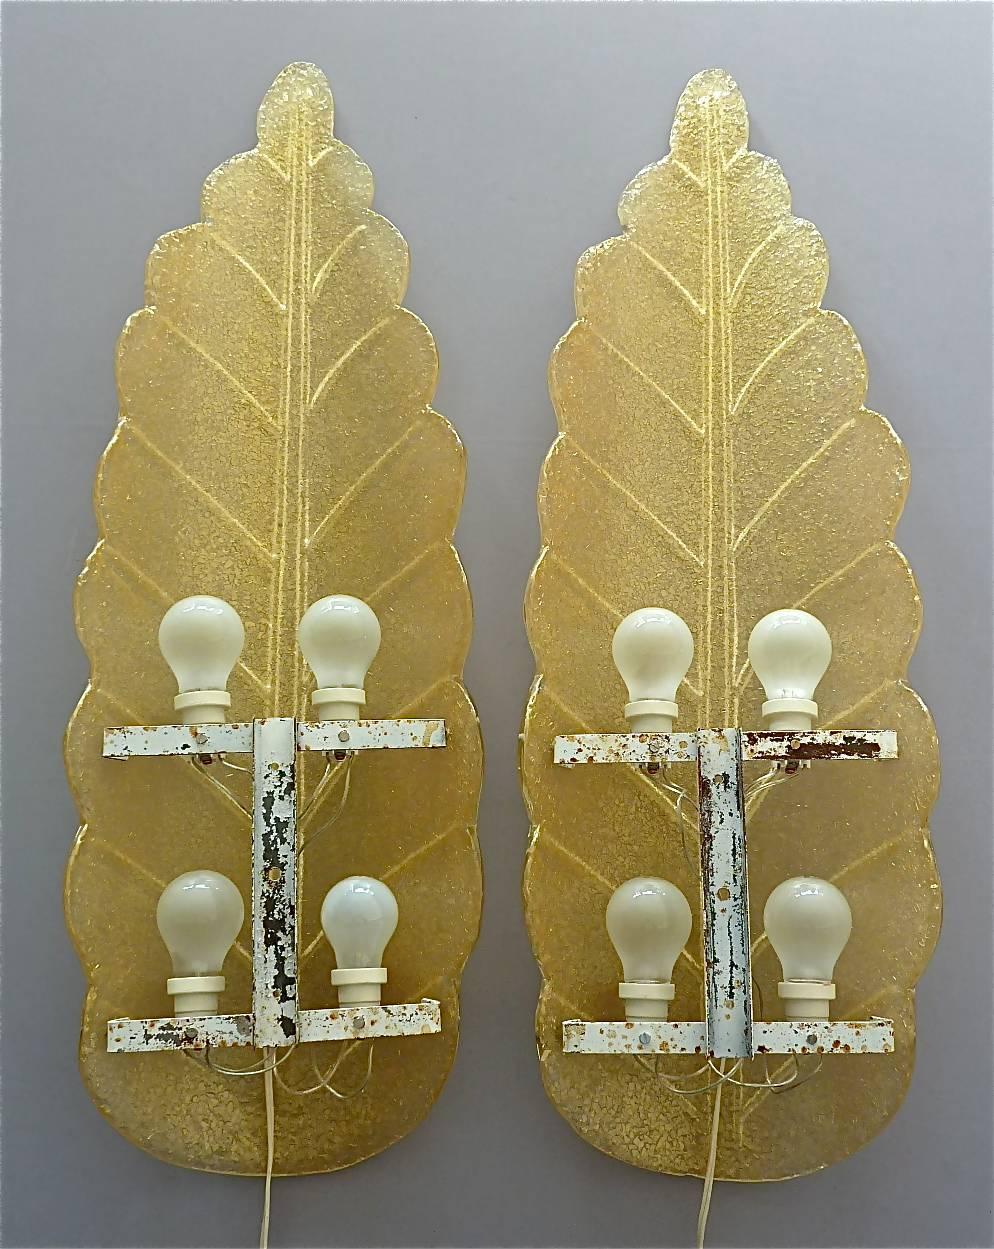 Late 20th Century Monumental Pair of Murano Art Glass Golden Leaf Sconces Lights Barovier, 1970s For Sale